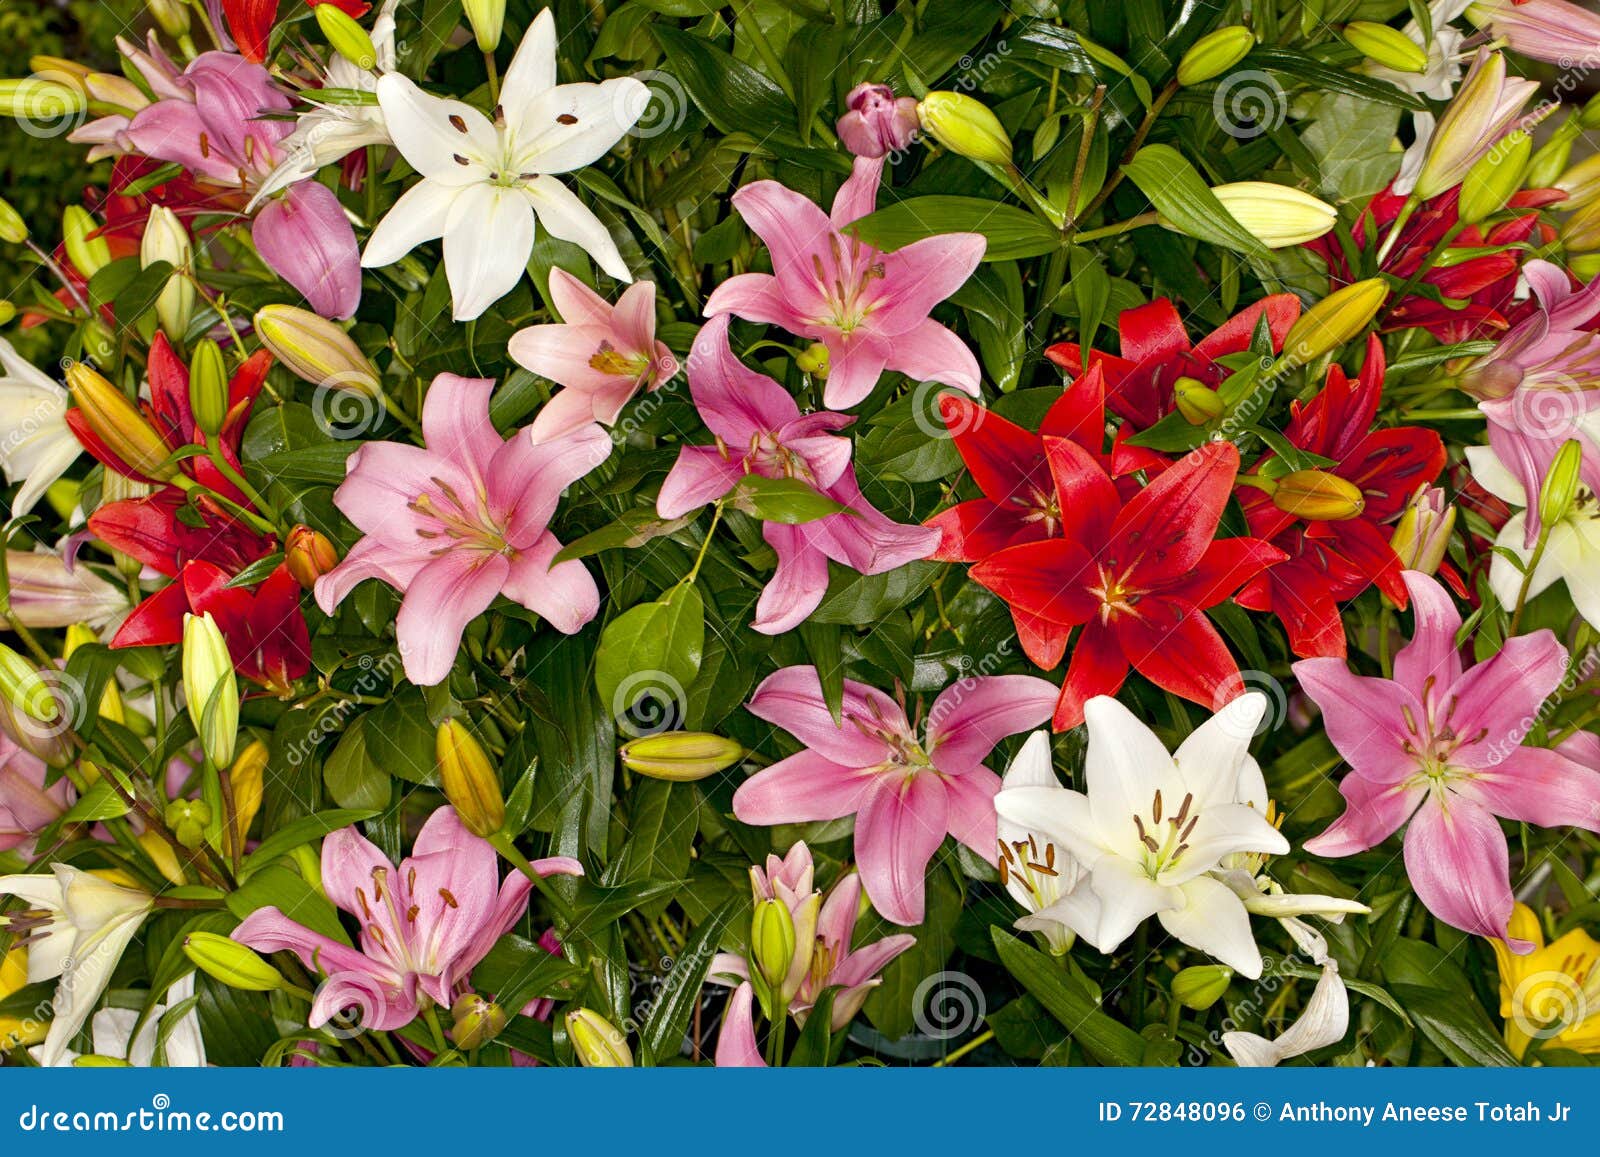 assorted asiatic lilies